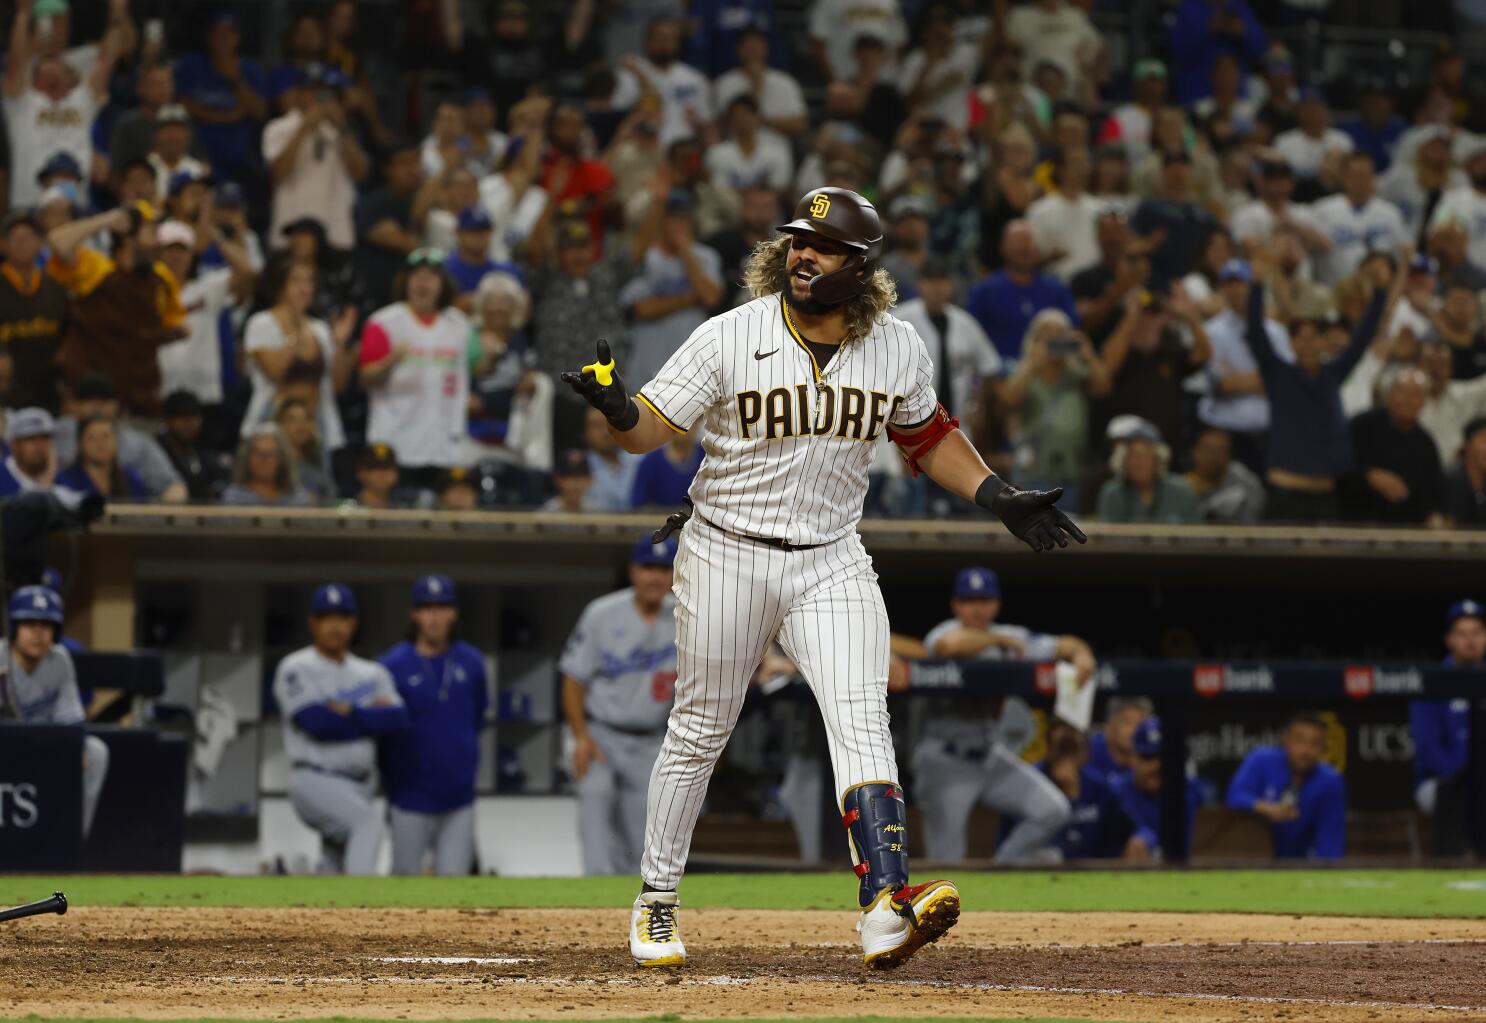 Depleted Padres Head to L.A. After Houston's Big Inning Leads to